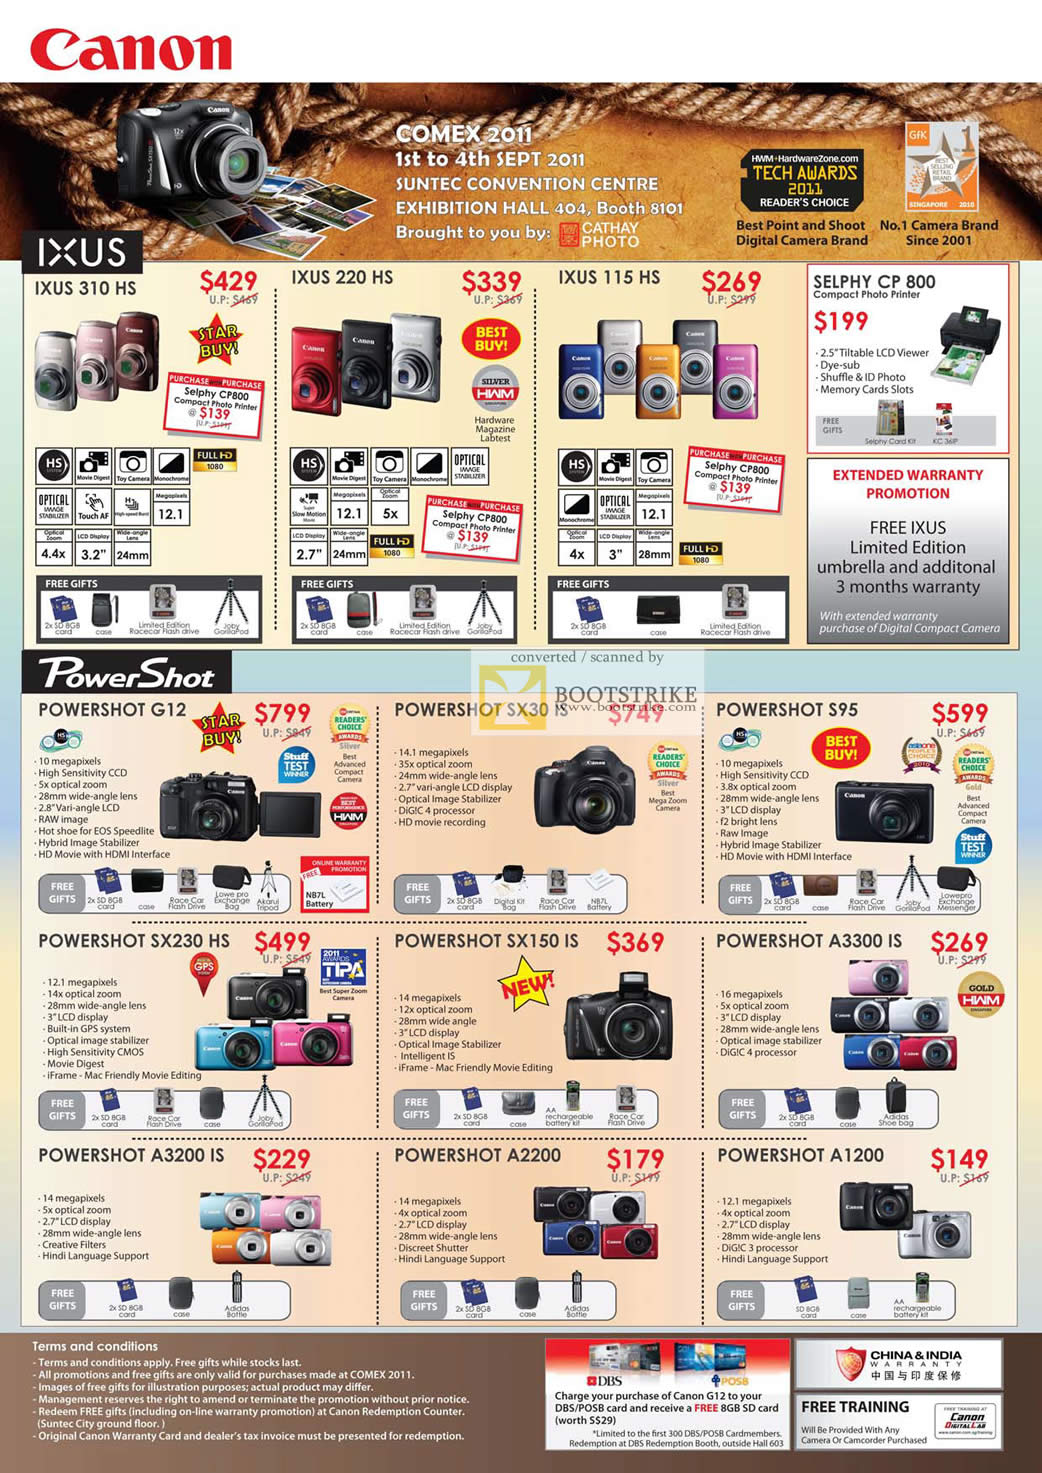 COMEX 2011 price list image brochure of Canon Digital Cameras IXUS 310 HS 220 115 Selphy CP 800 Powershot G12 SX30 IS S95 SX230 HS SX150 A3300 A3200 A2200 A1200